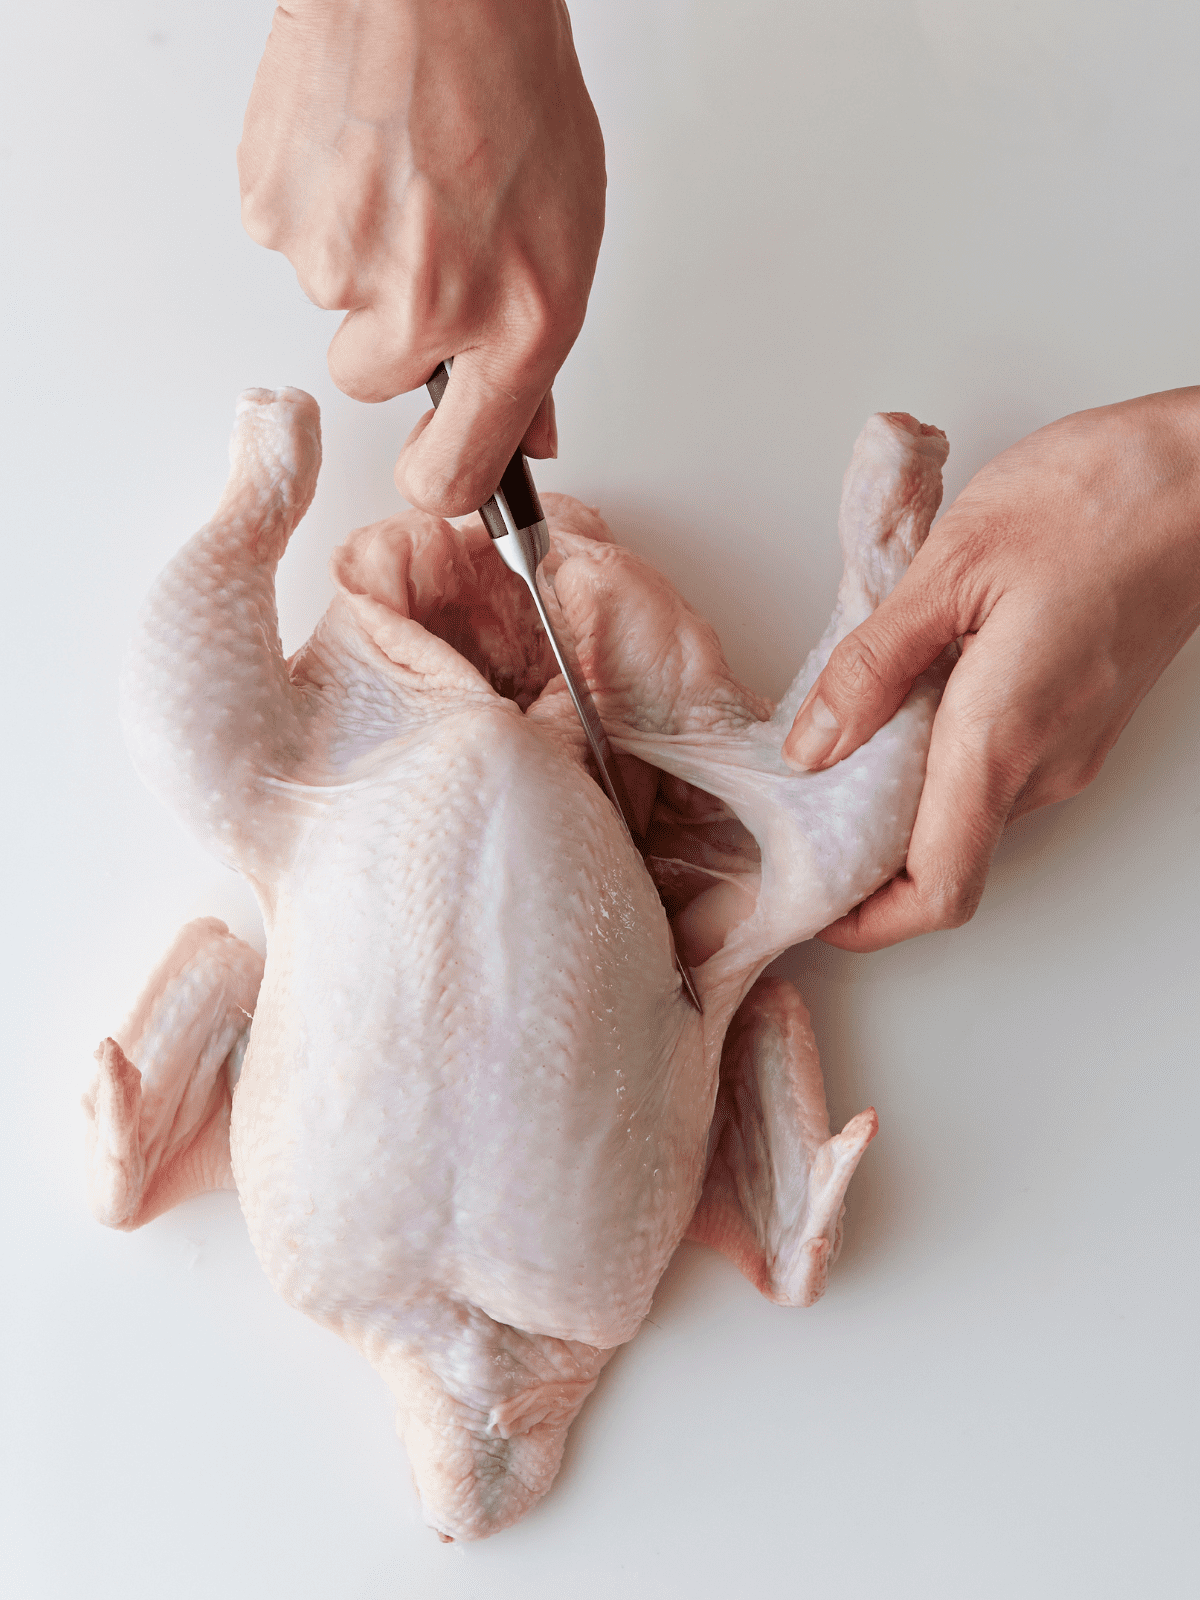 A knife cutting a whole chicken into pieces.